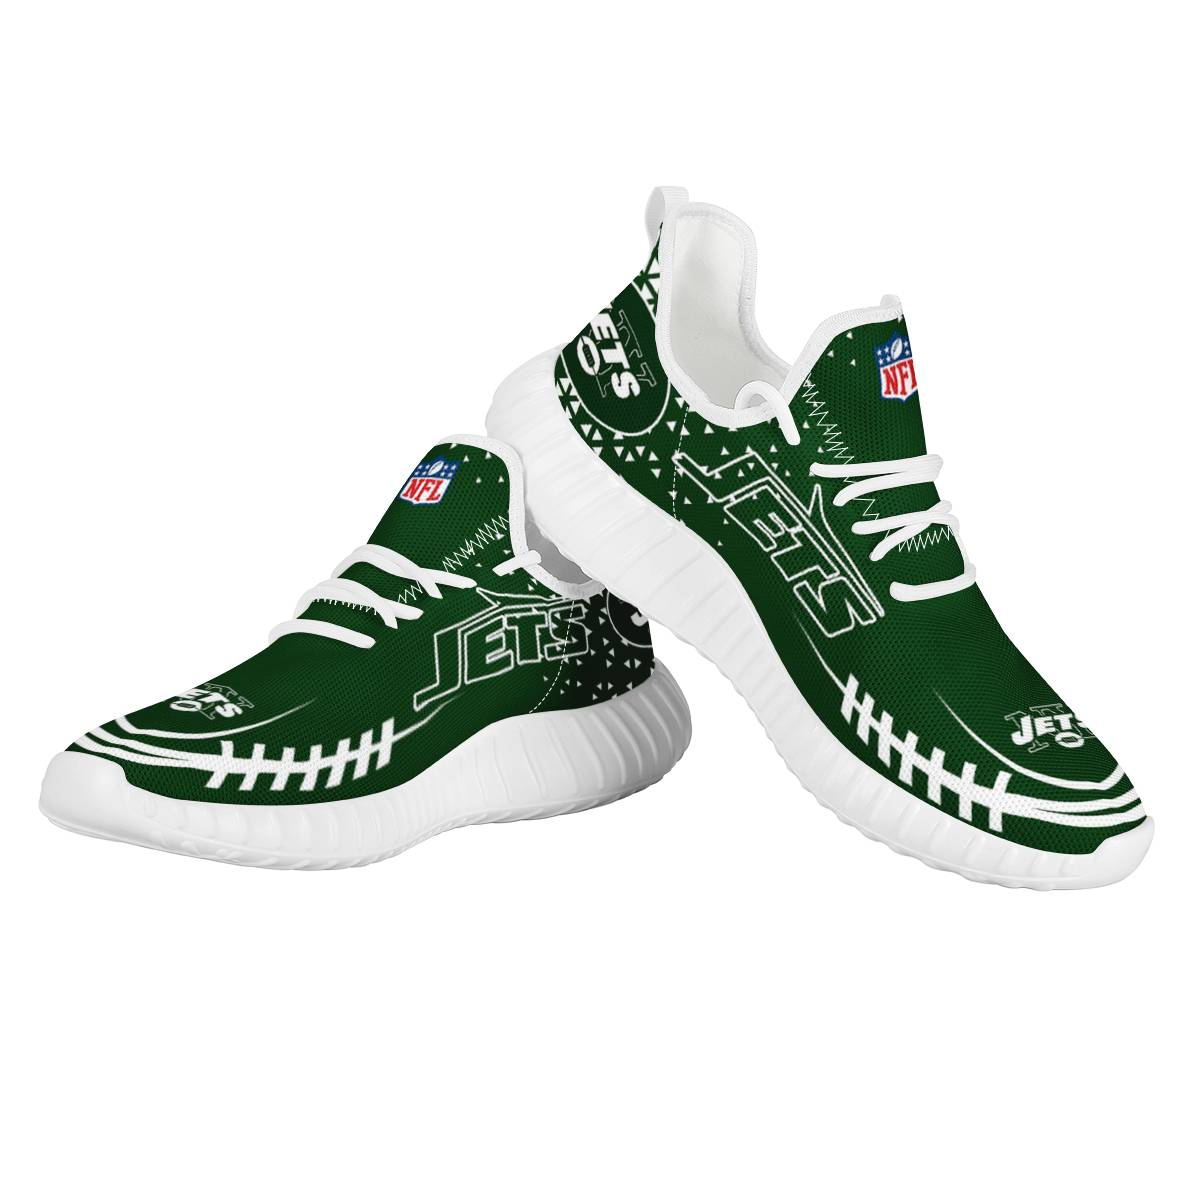 Women's NFL New York Jets Mesh Knit Sneakers/Shoes 005